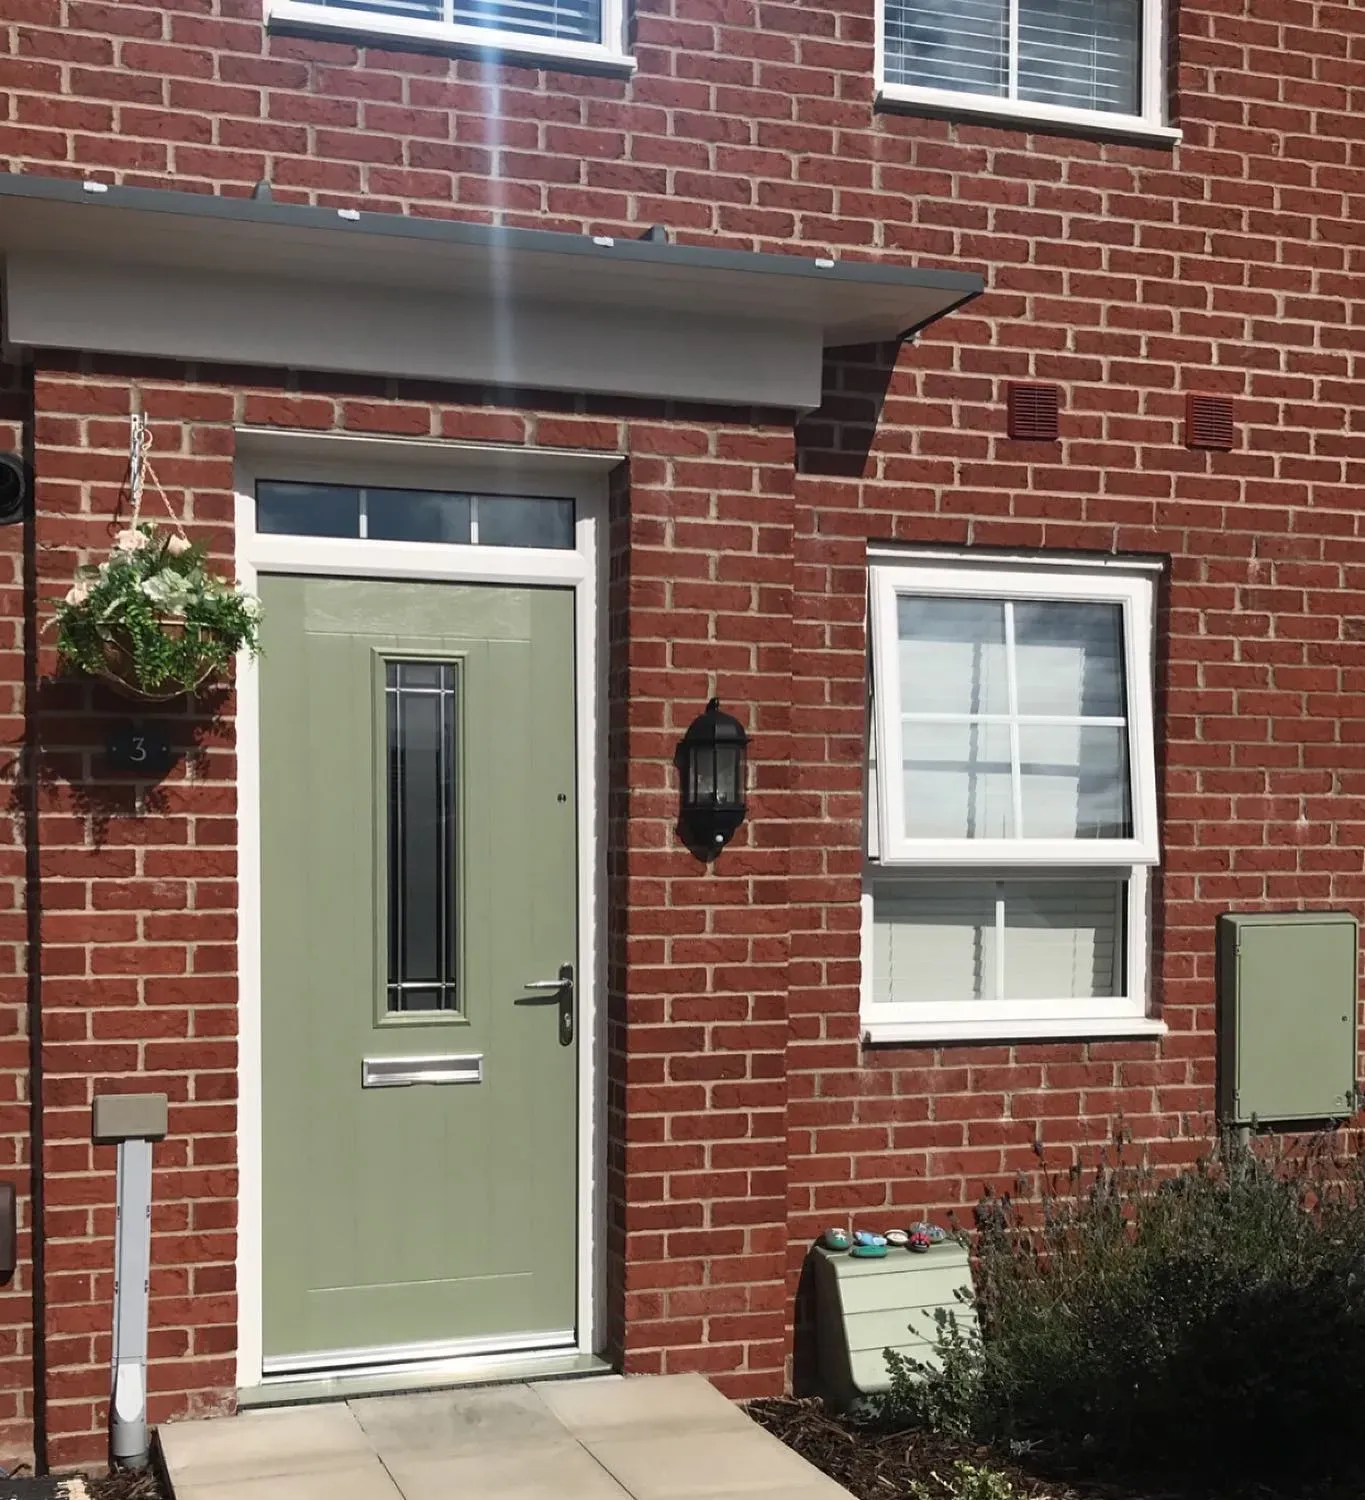 Dulux Green Glade exterior paint